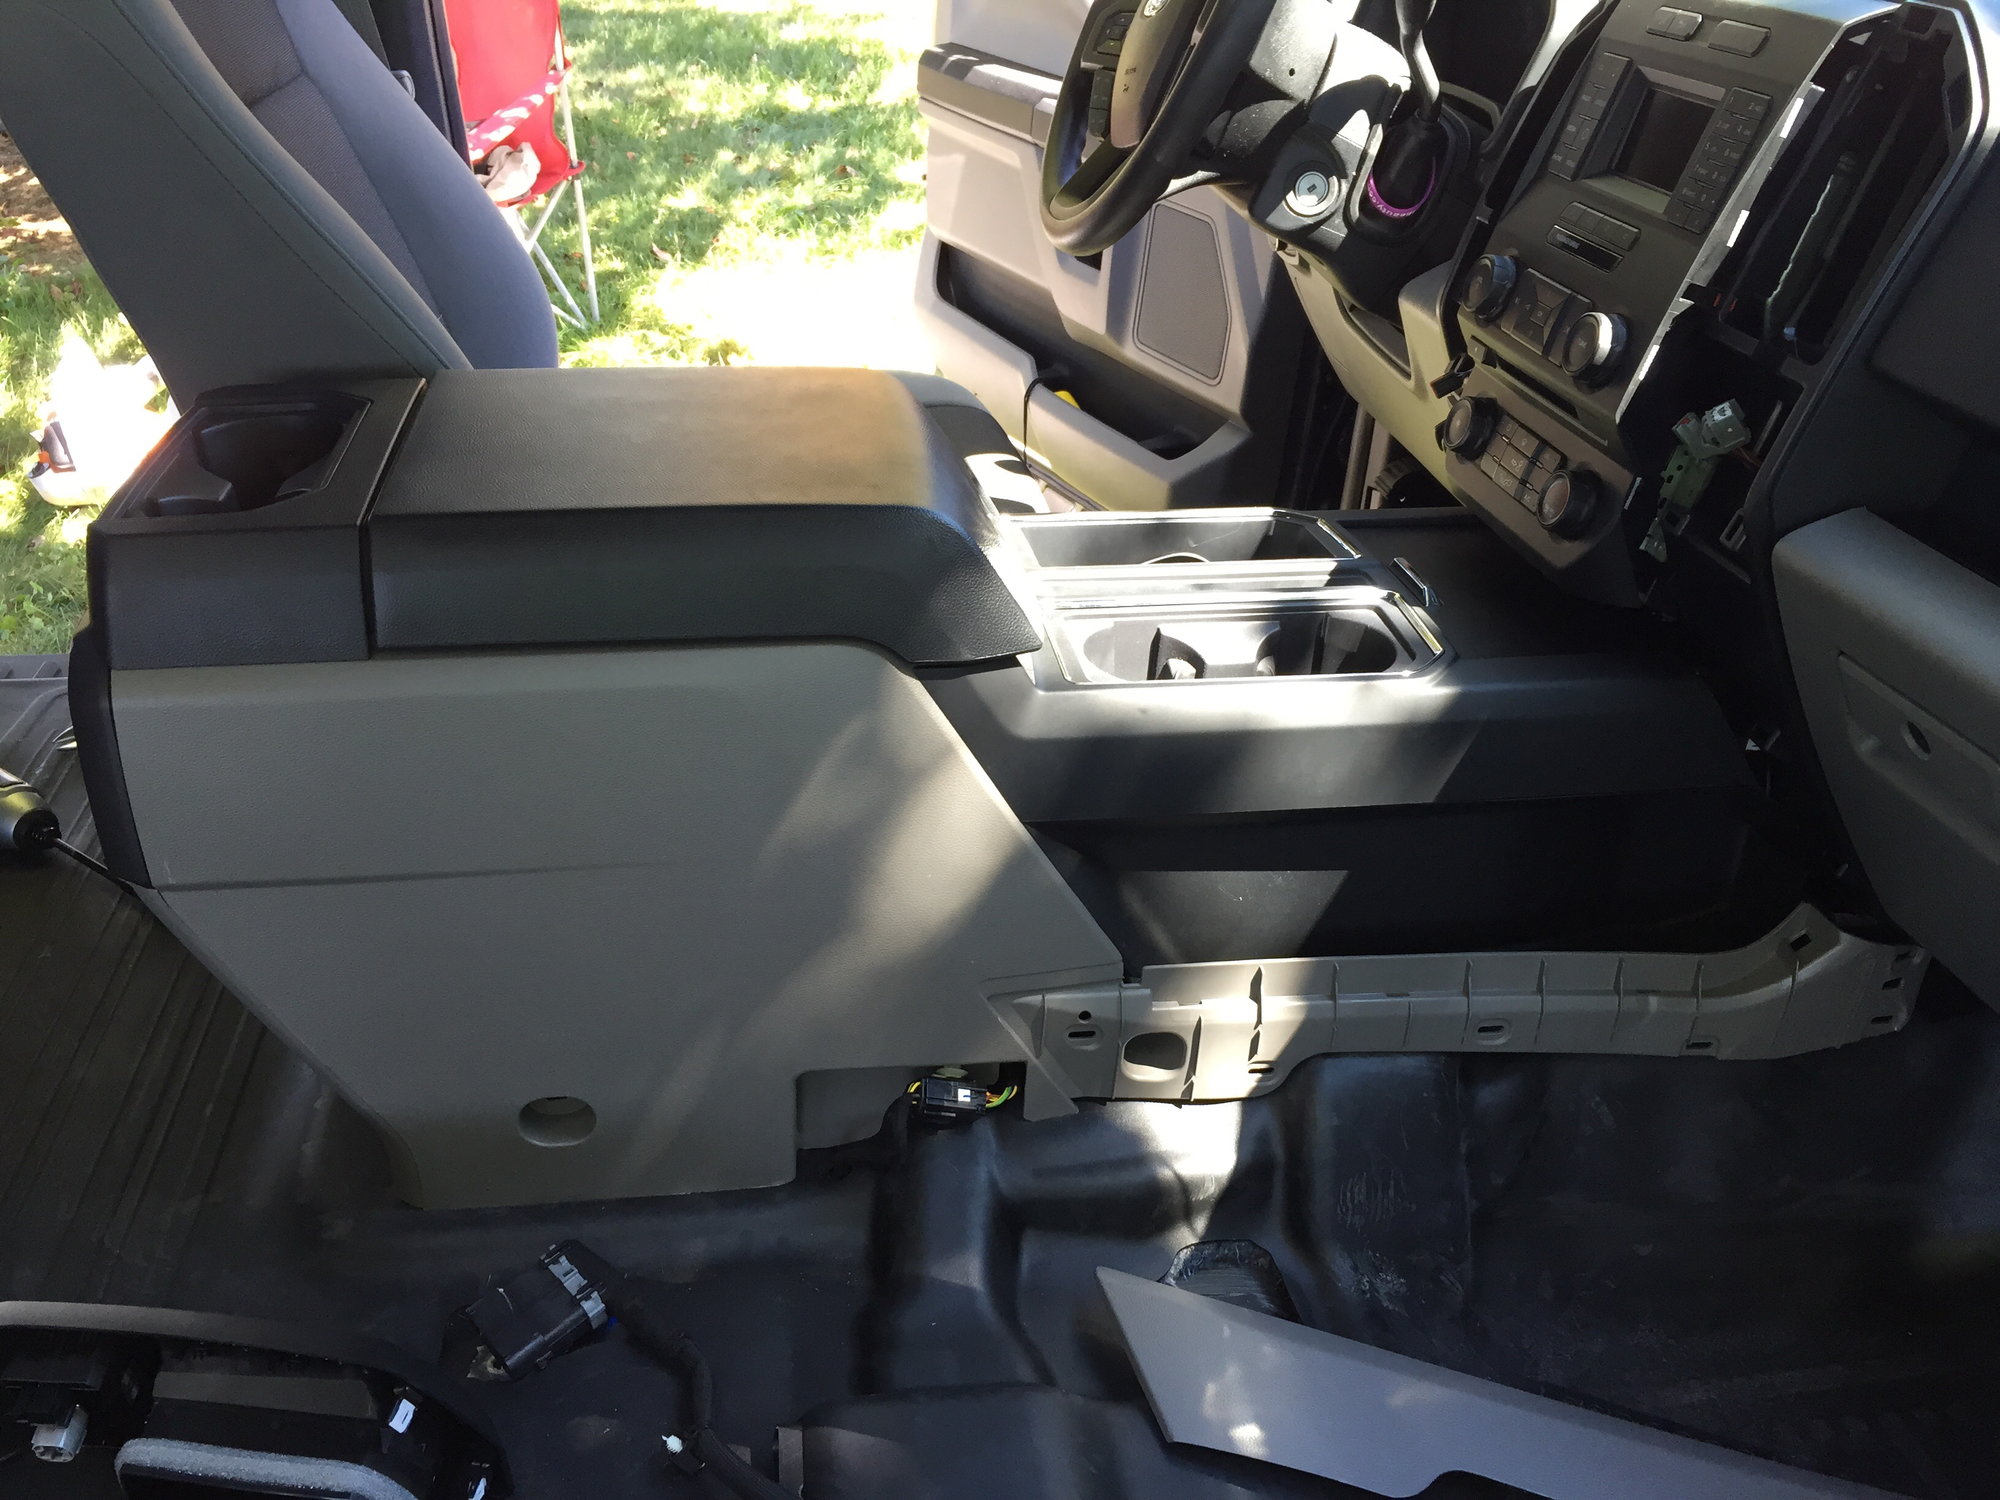 Swapping Center Console To A Jump Seat F150online Forums